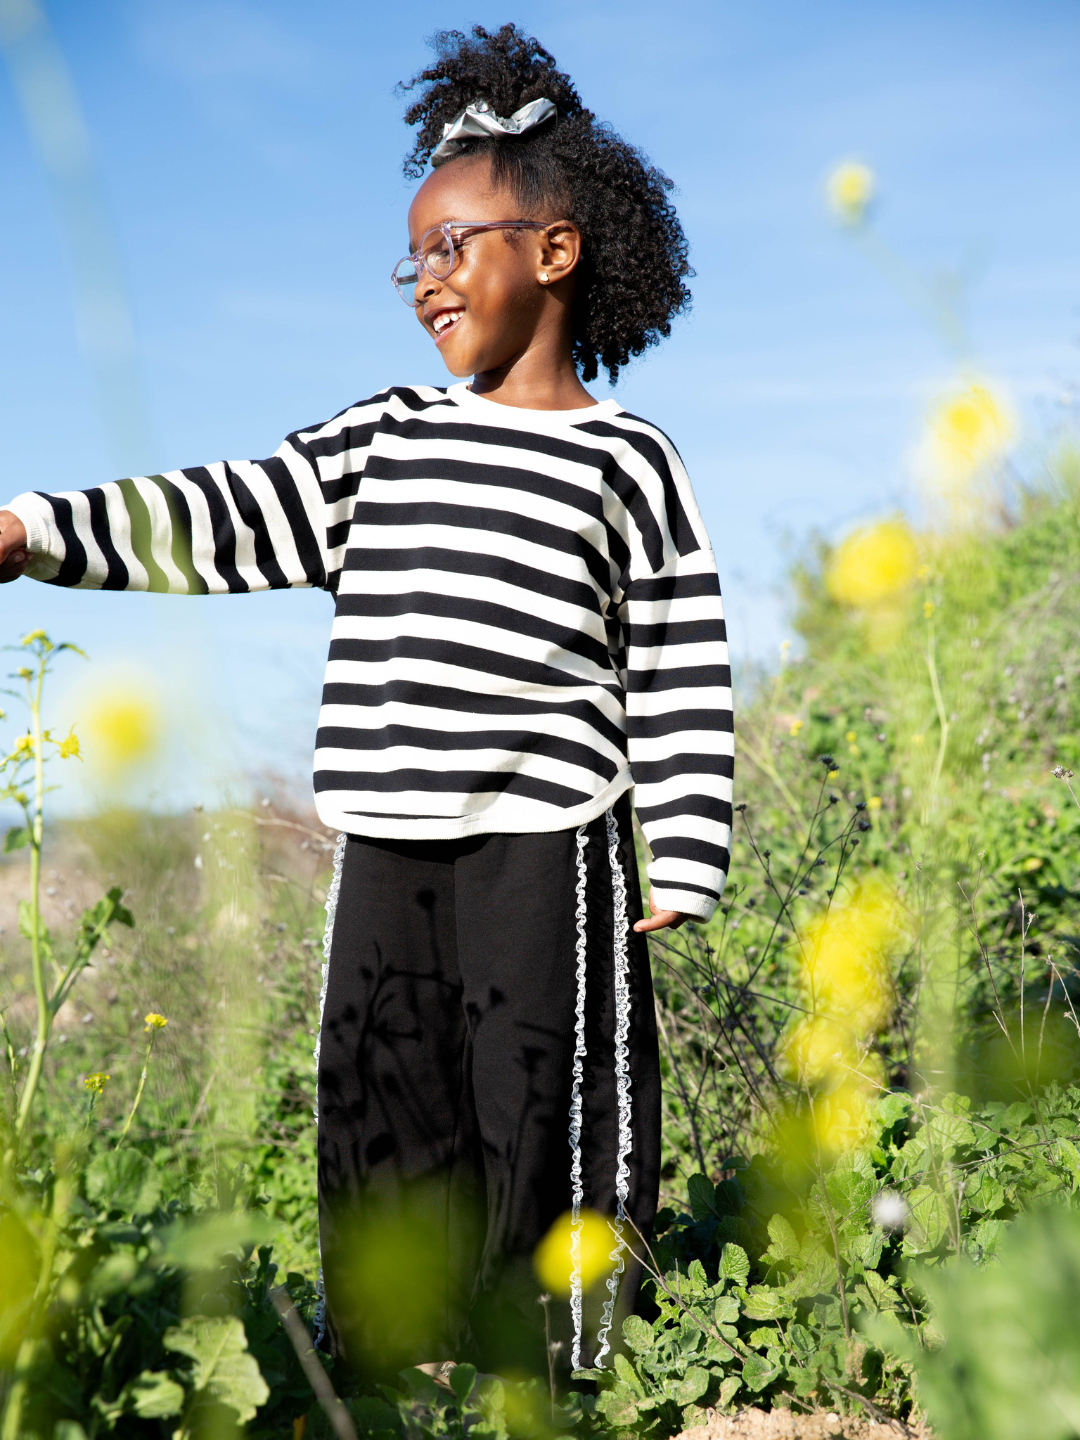 Black | Child wearing the perfect stripey longsleeve tee with black and cream horizontal stripes. She wears black sweatpants with two ruffled stripes down the side, pink glasses, and a silver scrunchie in her curly hair. She is smiling and standing in a green field with yellow flowers and blue sky.